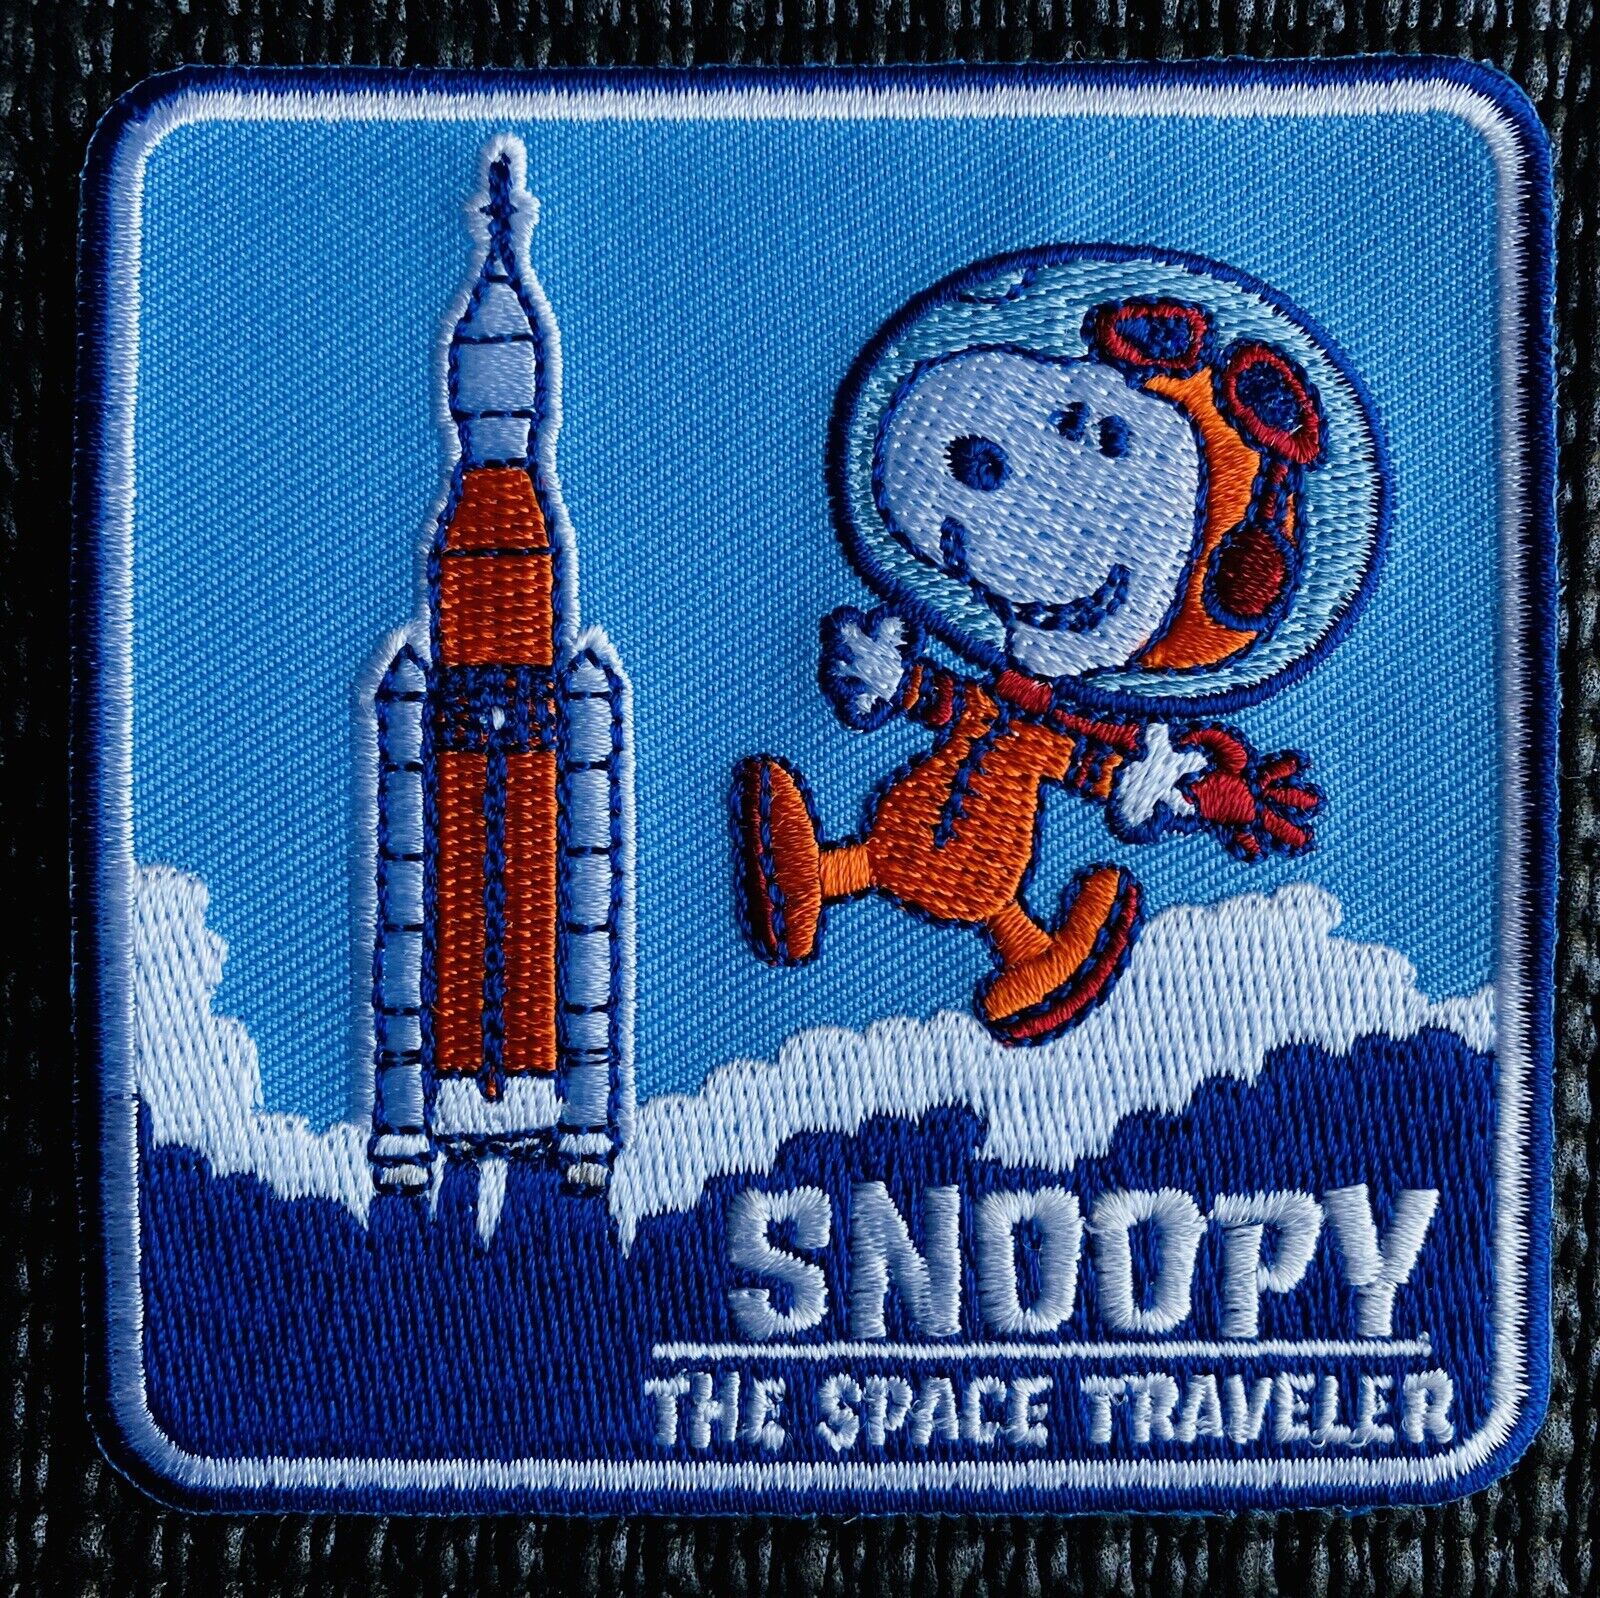 NASA SPACE PATCH - MOON CAMPAIGN - SPACE TRAVELER -3.5”